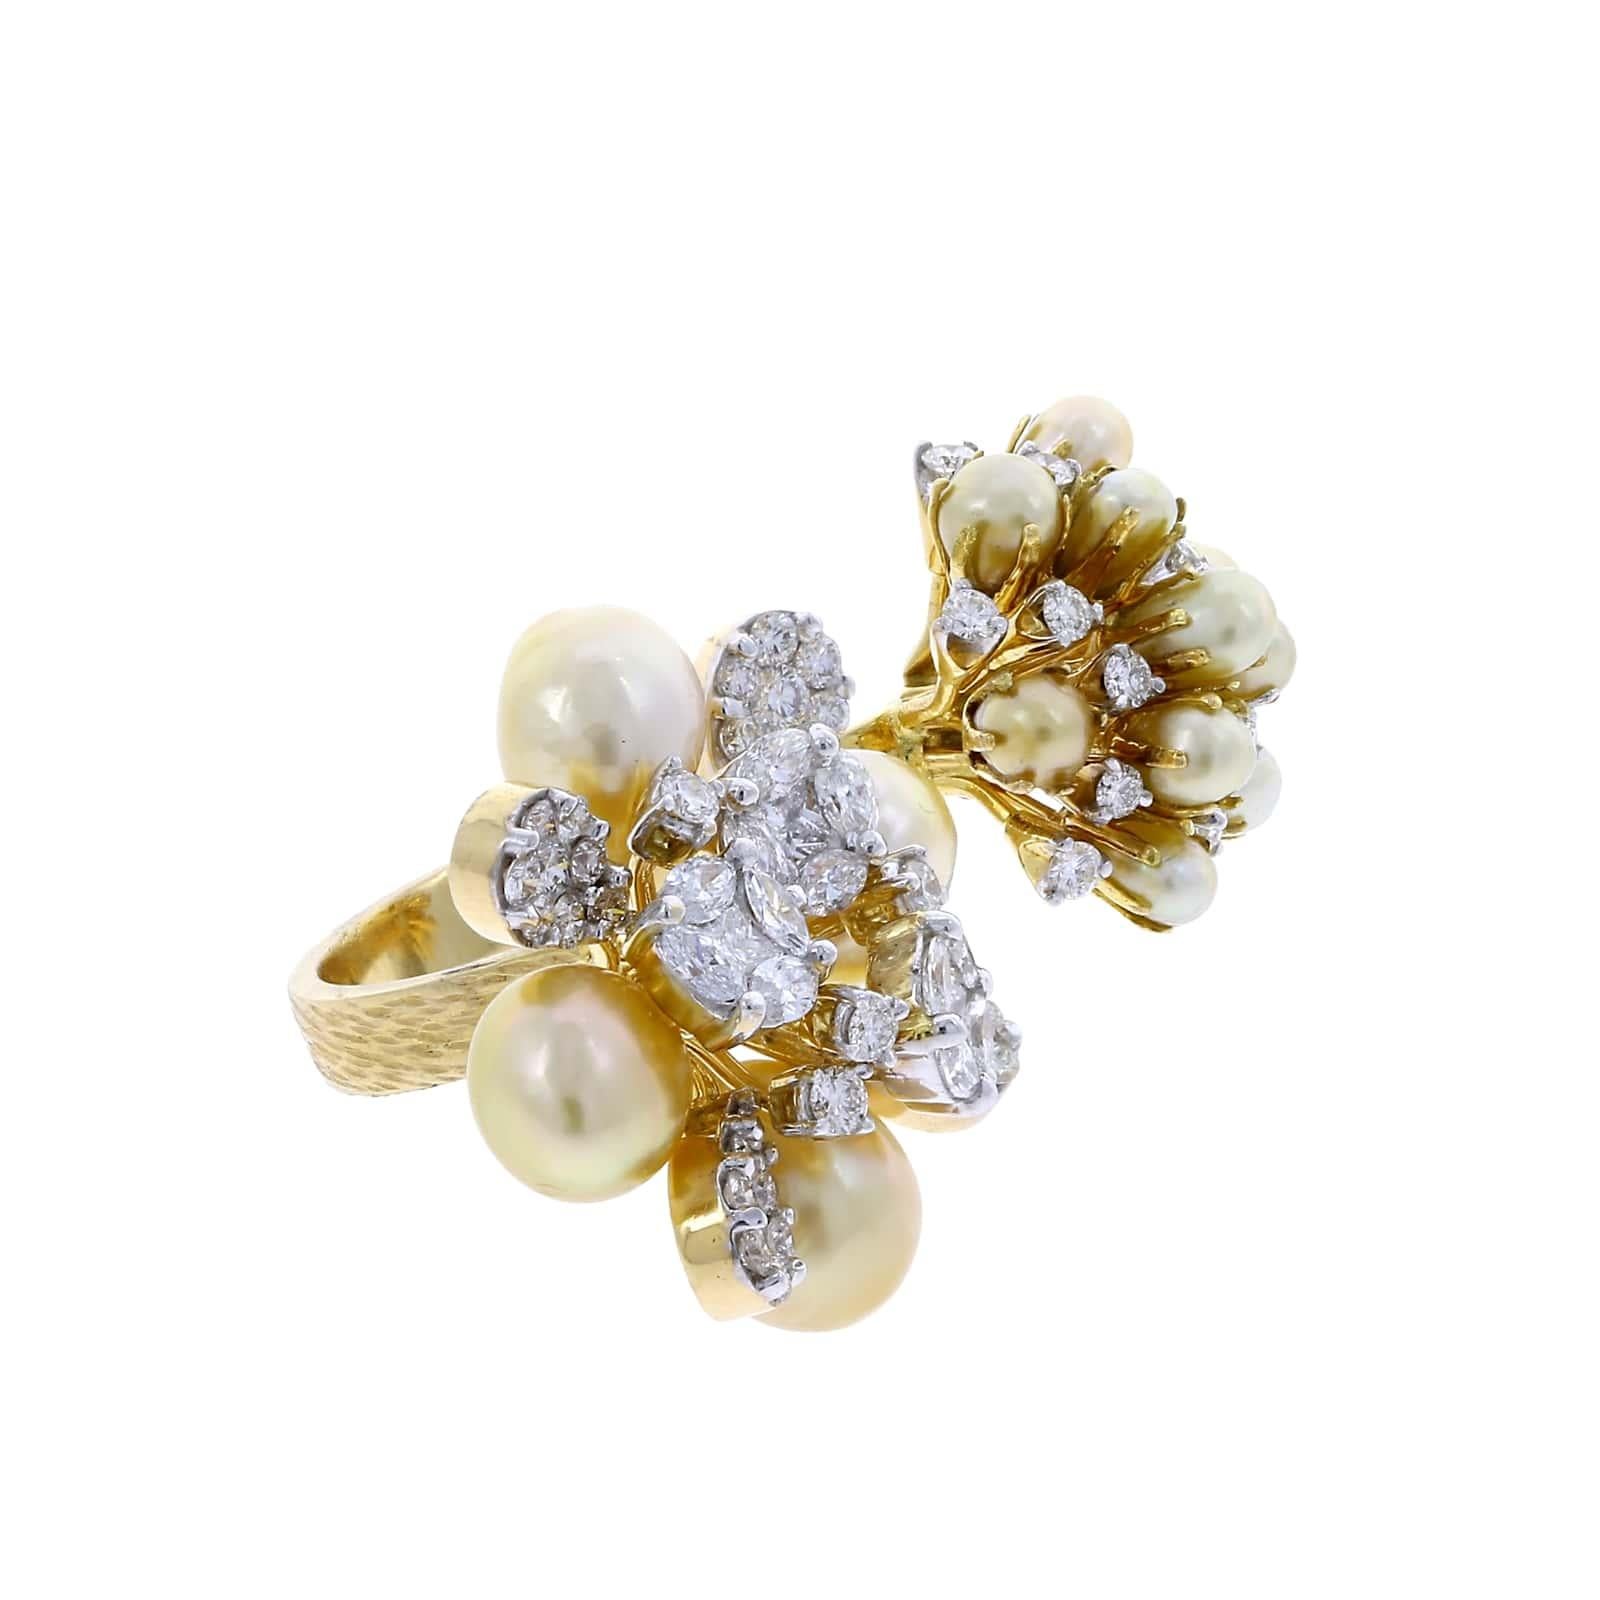 Women's or Men's Pearl Clusters Open Ring with Mixed Cut Diamonds, 18 Karat Gold